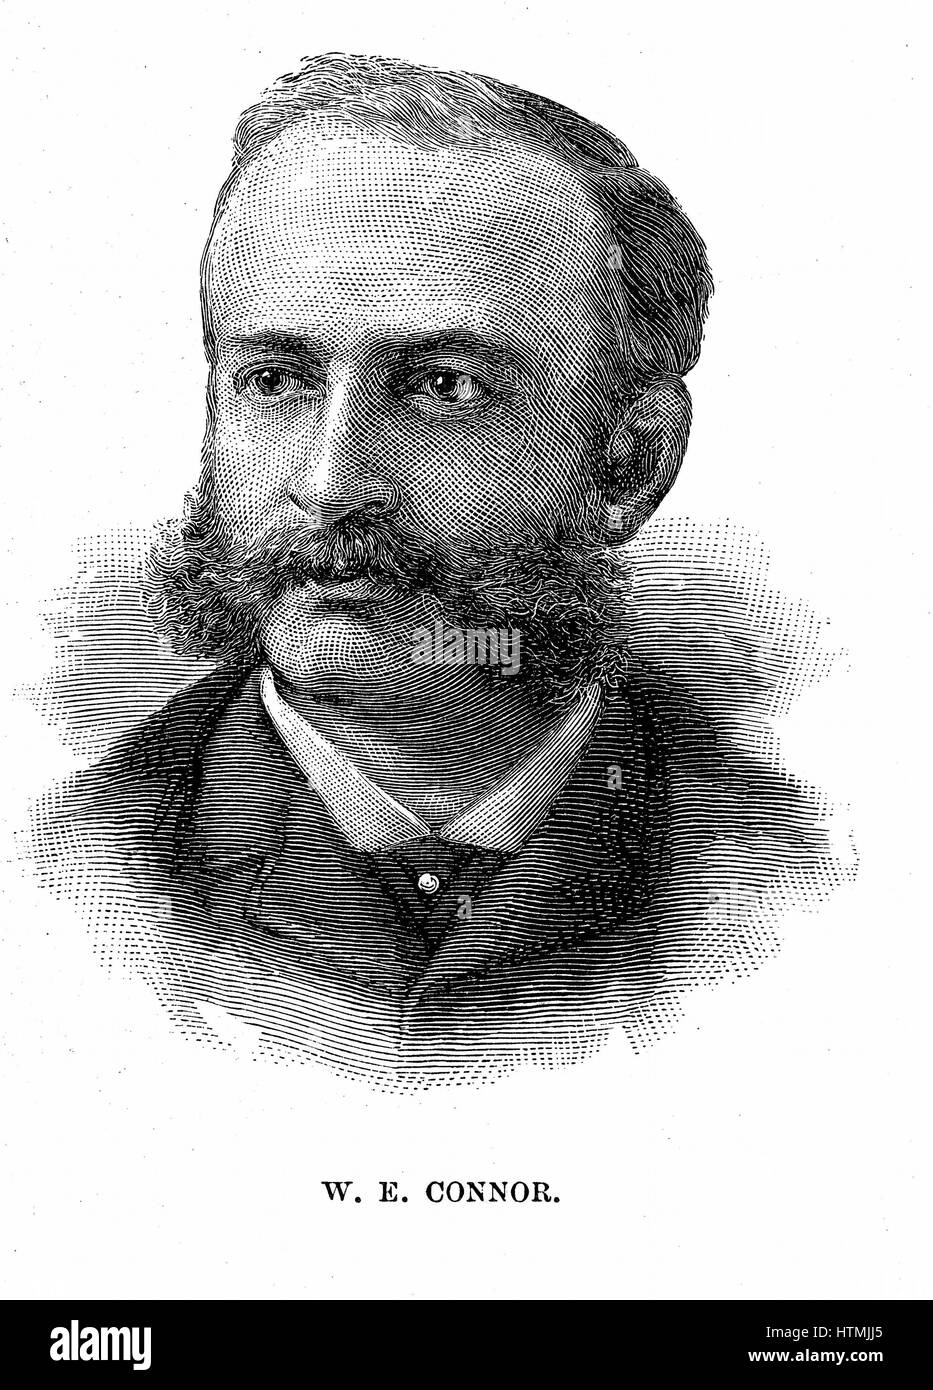 Washington E Connor, partner and broker of Jay Gould. Thought to do the largest brokerage business in the New York Stock Exchange. Engraving 1885 Stock Photo